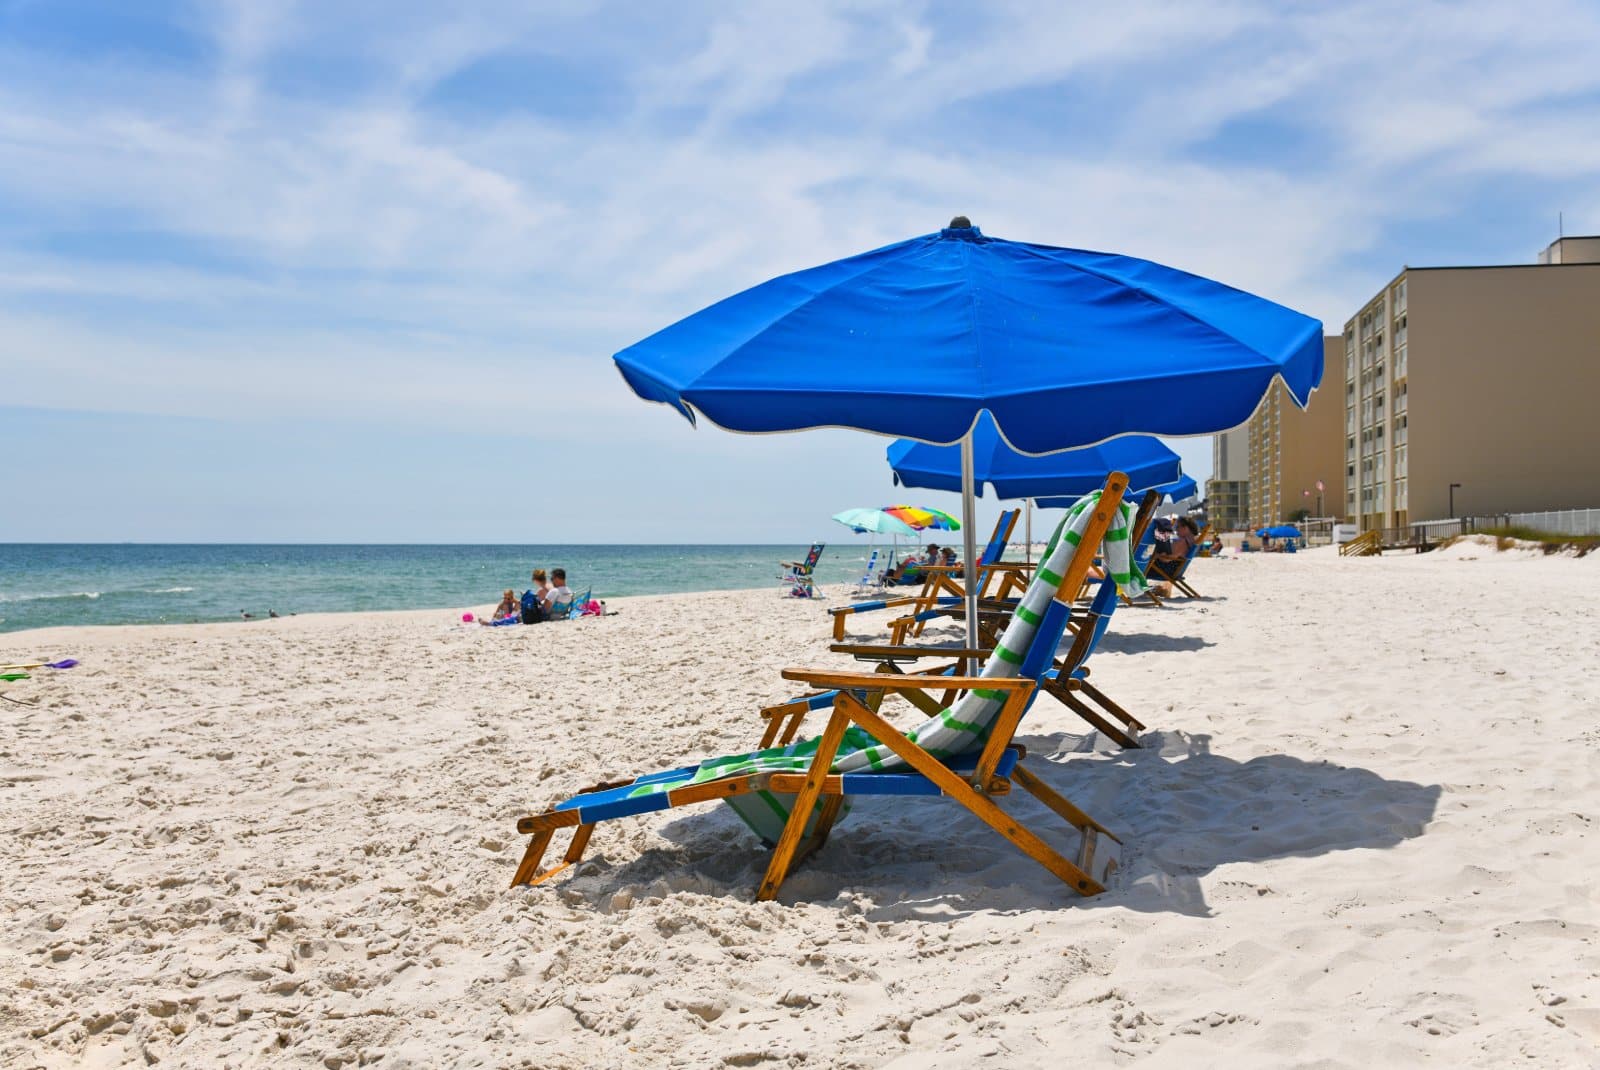 <p class="wp-caption-text">Image Credit: Shutterstock / Mark Winfrey</p>  <p><span>Alabama welcomes beachgoers to the Gulf Shores, offers deep dives into civil rights history, and celebrates music in Muscle Shoals.</span></p>